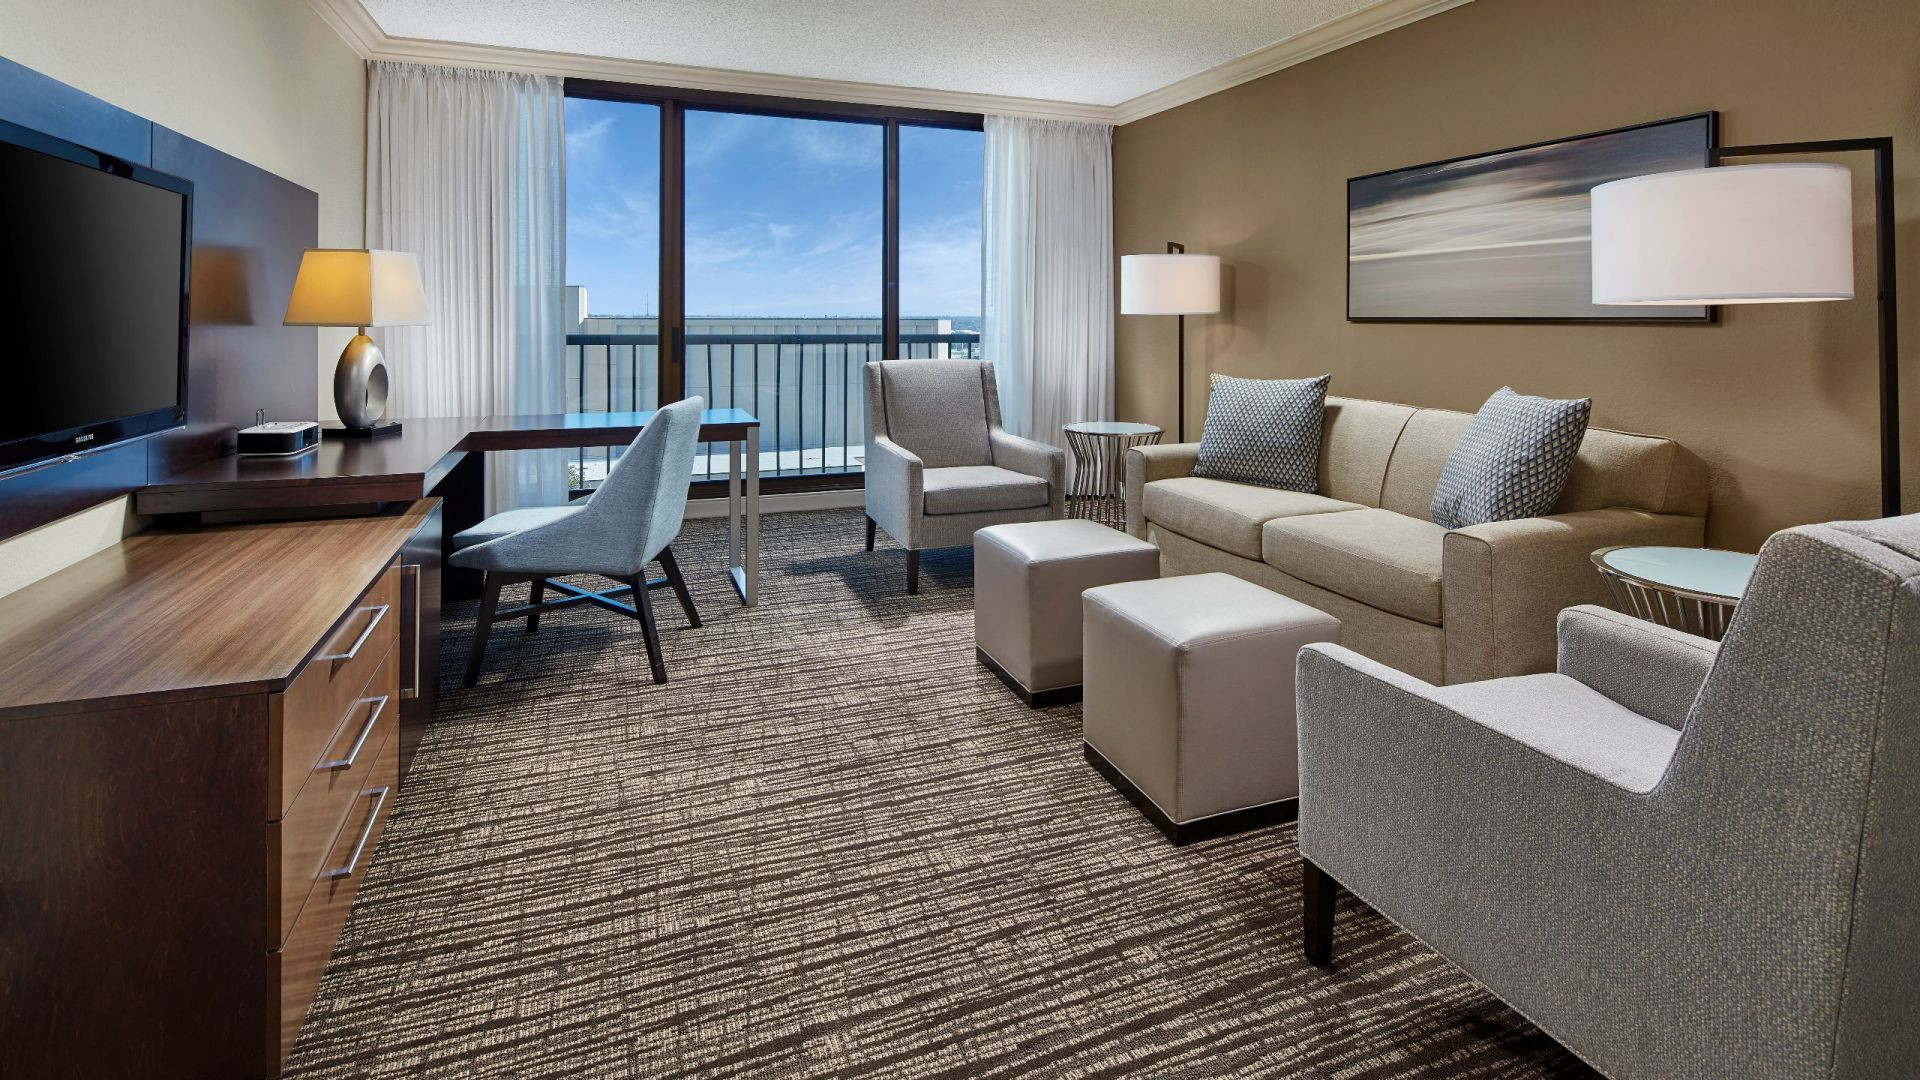 18 Trendy Renaissance Hardwood Floors Tulsa Ok 2023 free download renaissance hardwood floors tulsa ok of best luxury hotels in downtown tulsa ok hyatt regency tulsa with regard to hyatt regency tulsa offers modern and spacious hotel accommodations for you